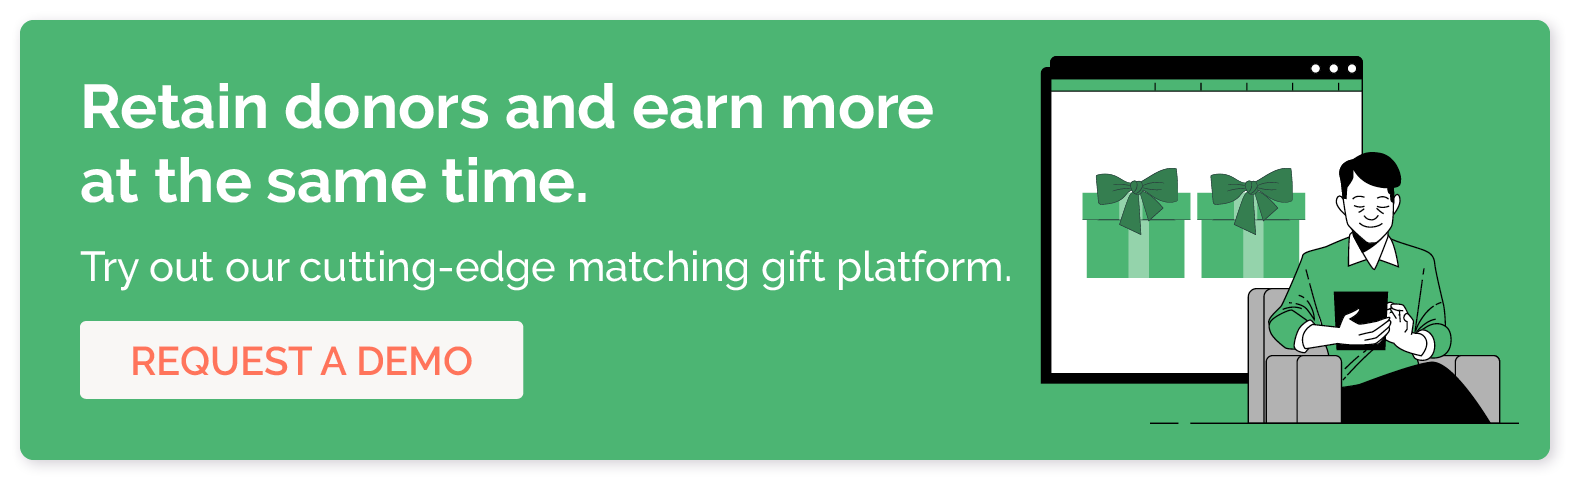 Retain donors and earn more at the same time. Try out our cutting-edge matching gift platform. Request a demo. 